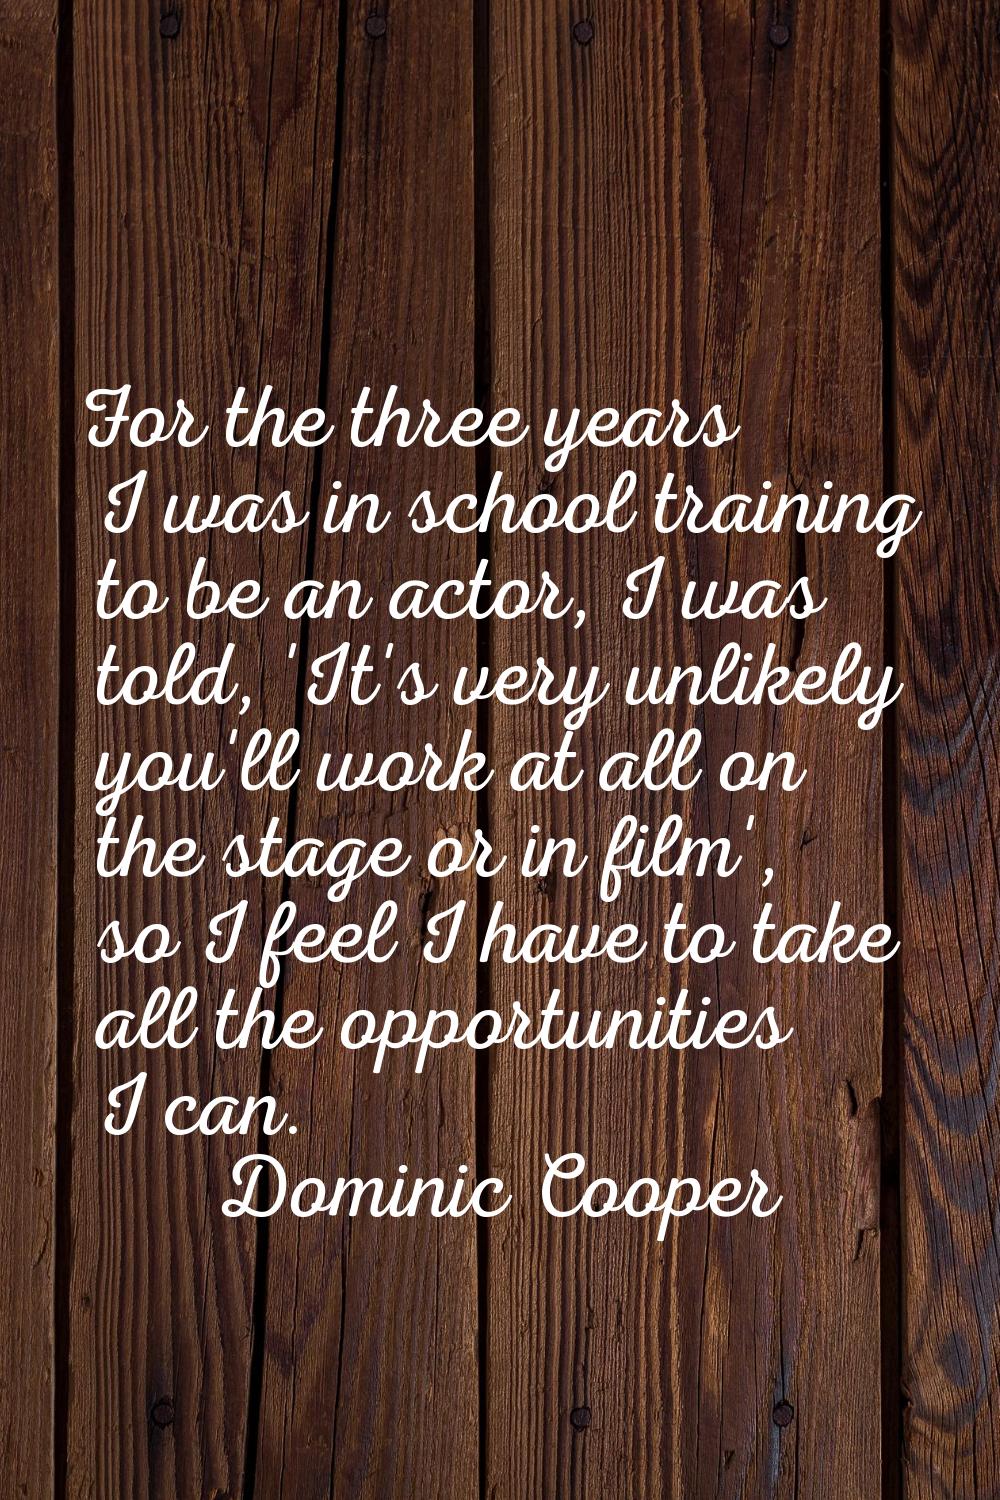 For the three years I was in school training to be an actor, I was told, 'It's very unlikely you'll